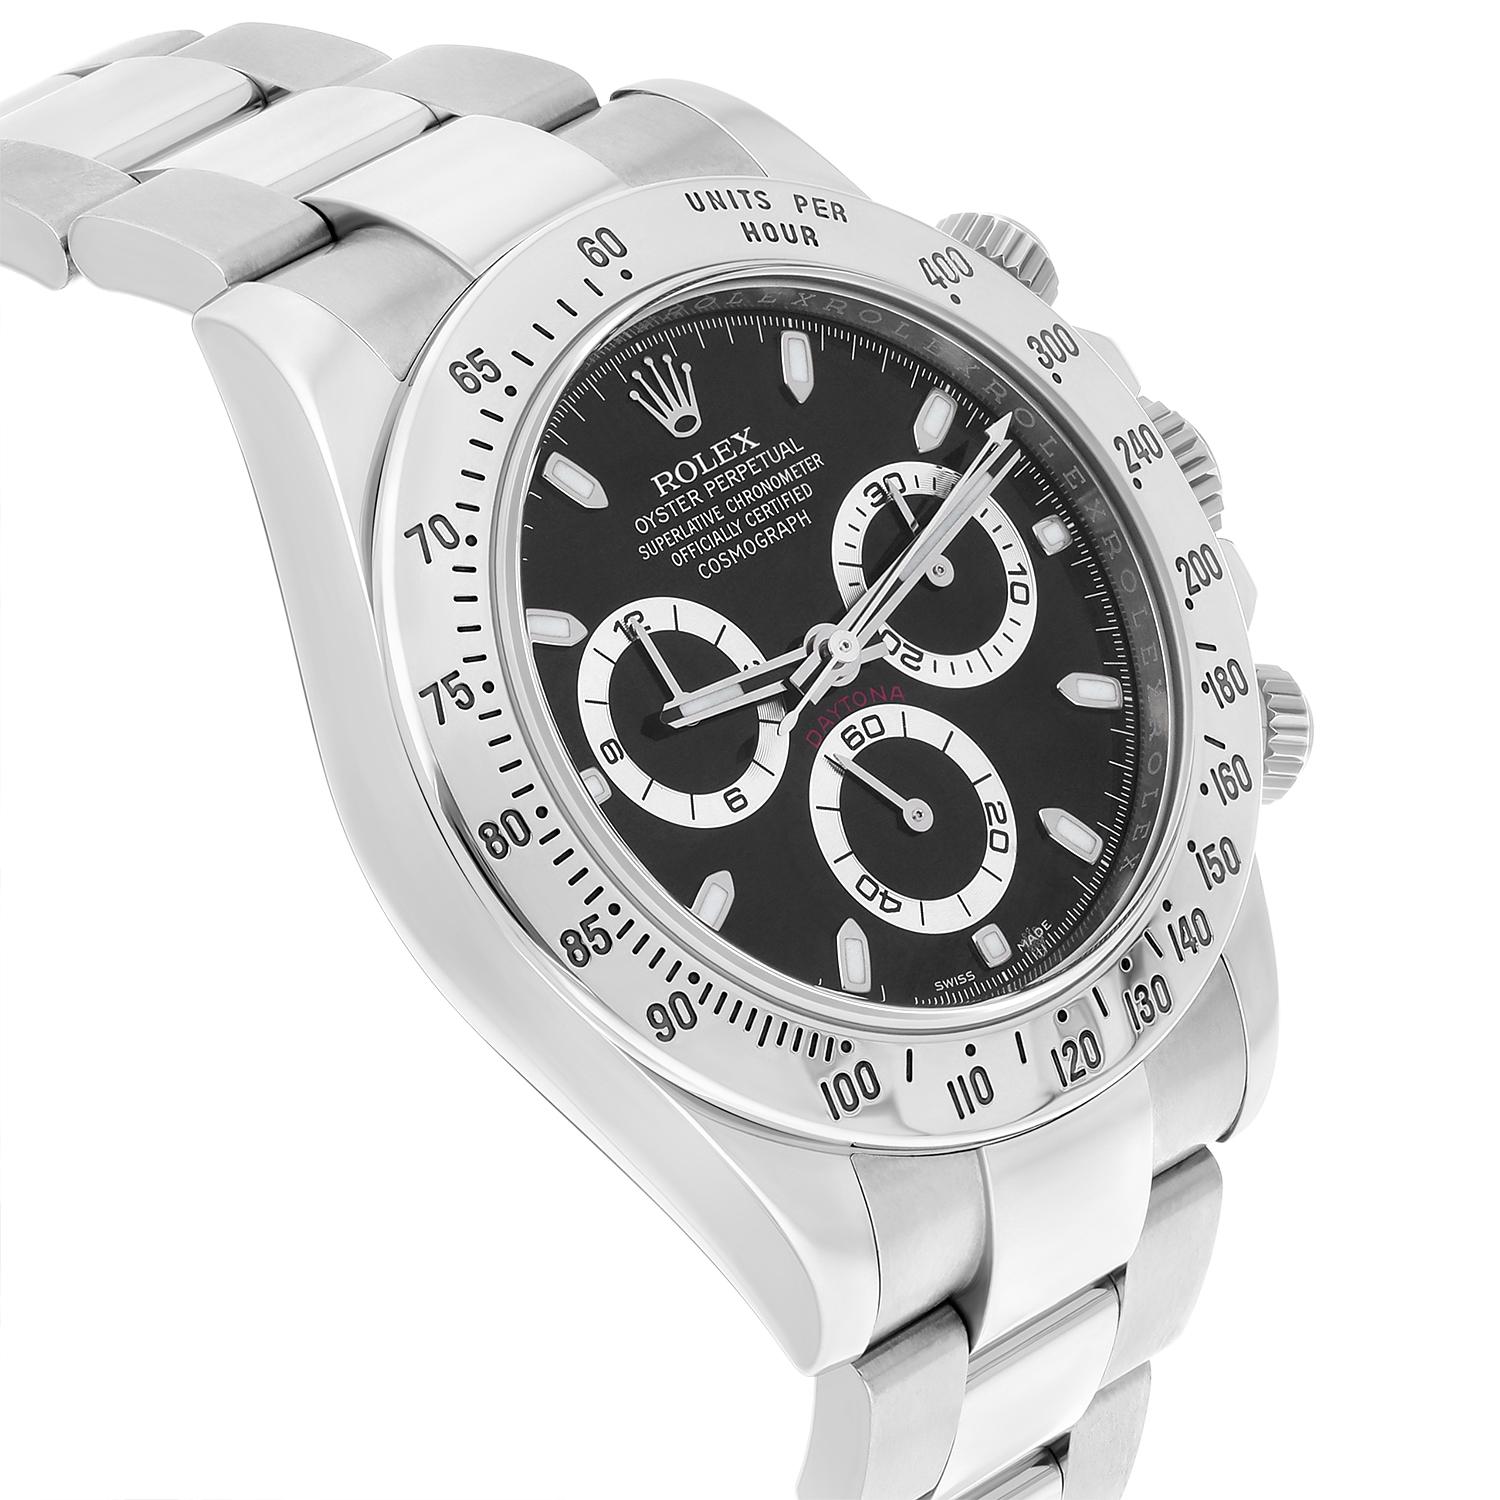 Rolex Cosmograph Daytona Stainless Steel 40mm Black Men's Watch 116520 In Excellent Condition For Sale In New York, NY